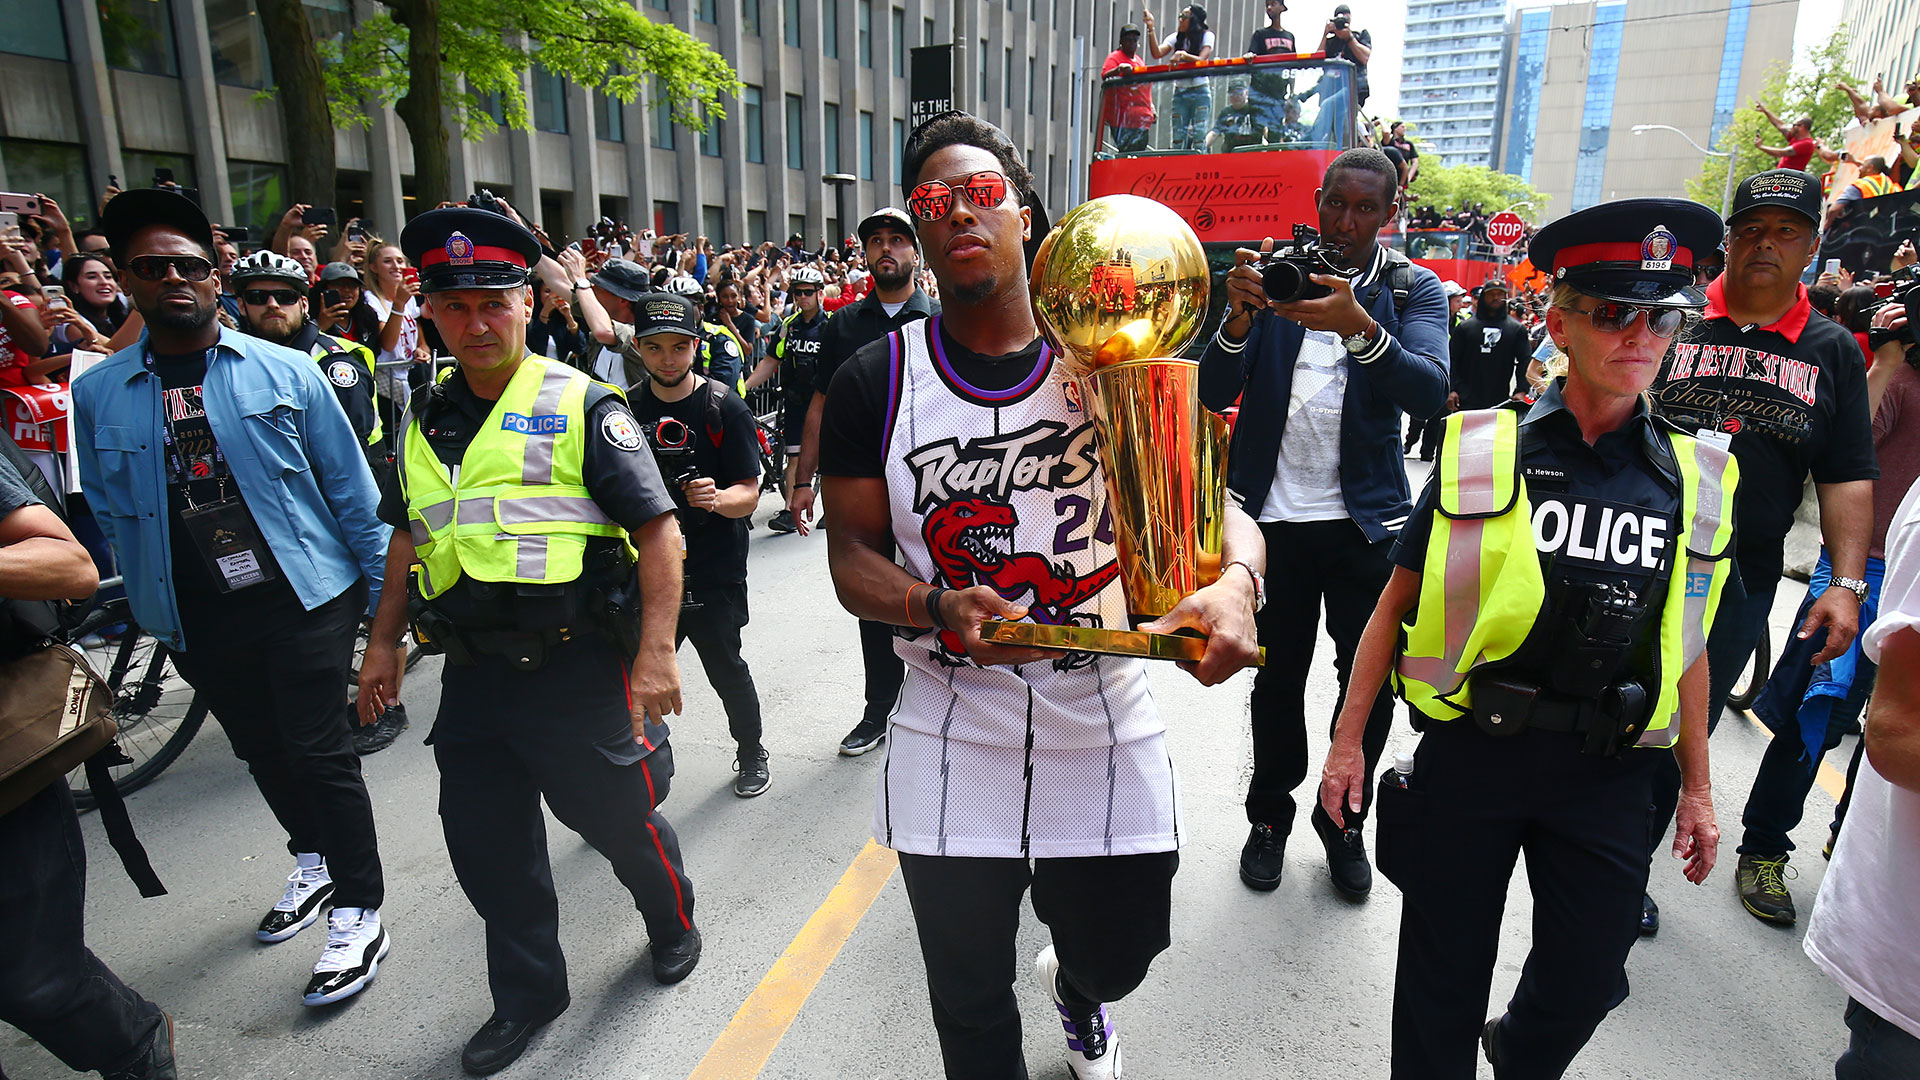 Kyle Lowry leaving Toronto for Miami Heat on a three-year contract